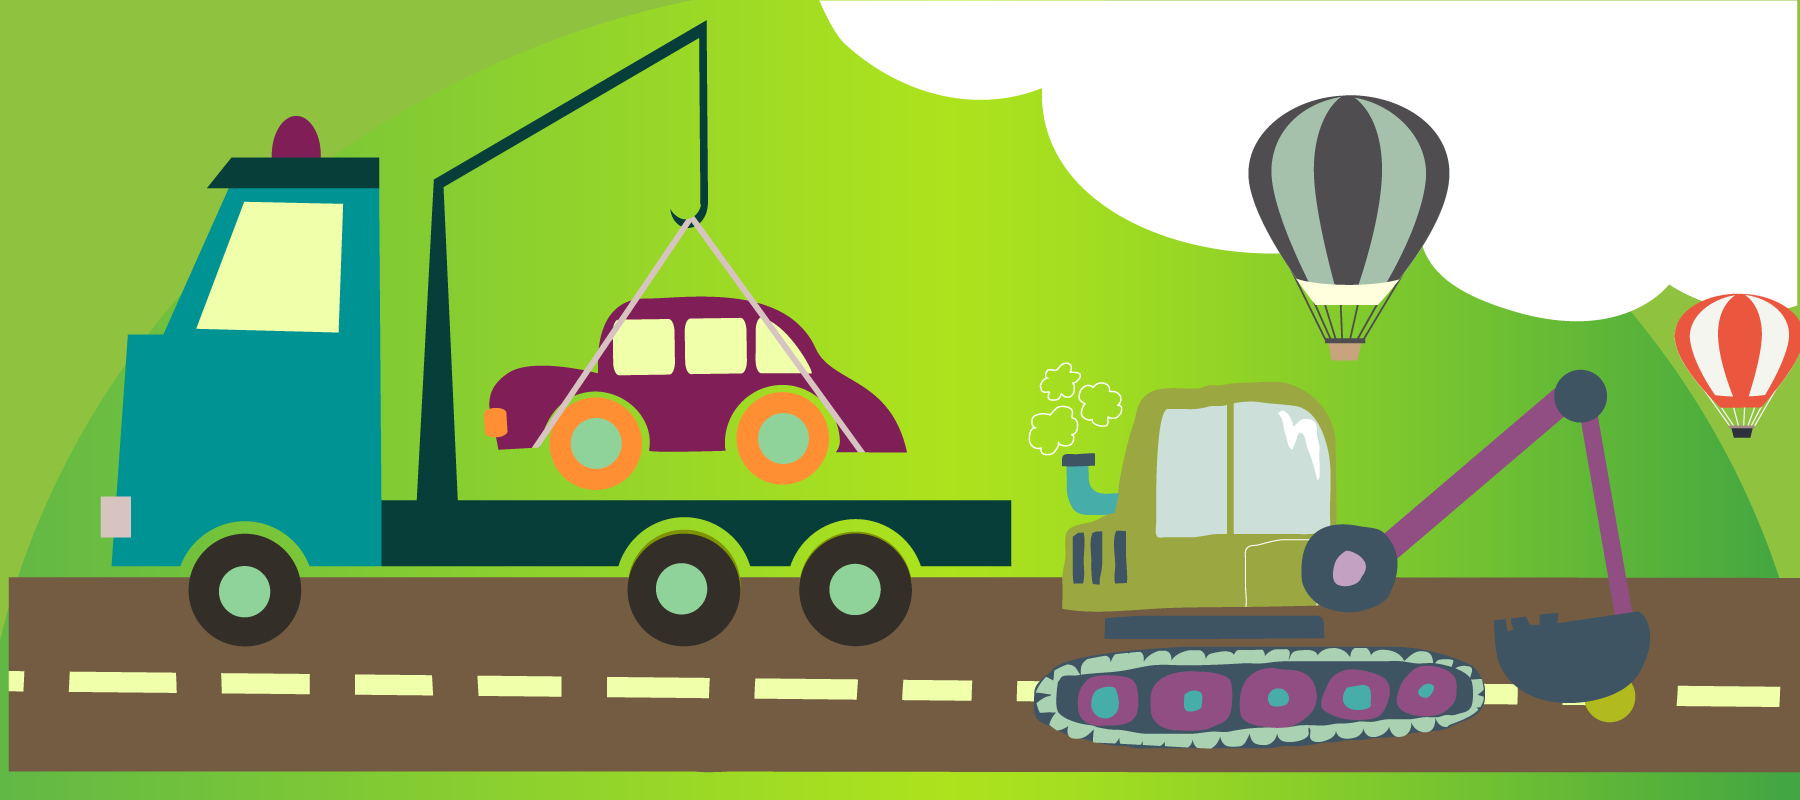 Illustration on a green background. On a two-lane road, a tow truck carrying a car travels one direction, and a shovel truck drives the other, while two hot air balloons float in the sky above.